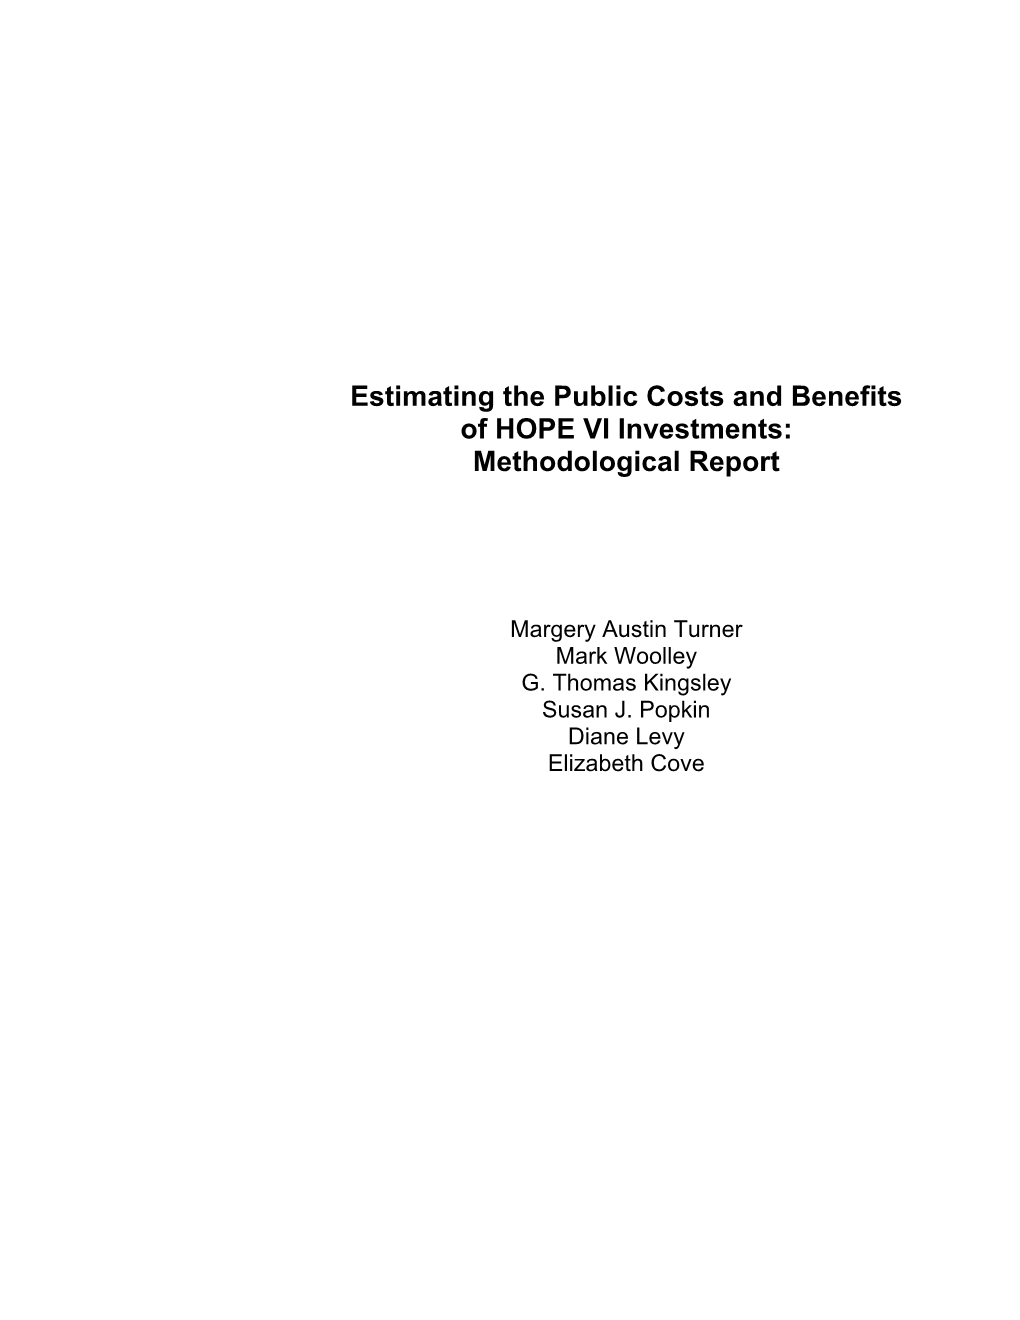 Costs and Benefits of HOPE VI Investments: Methodological Report